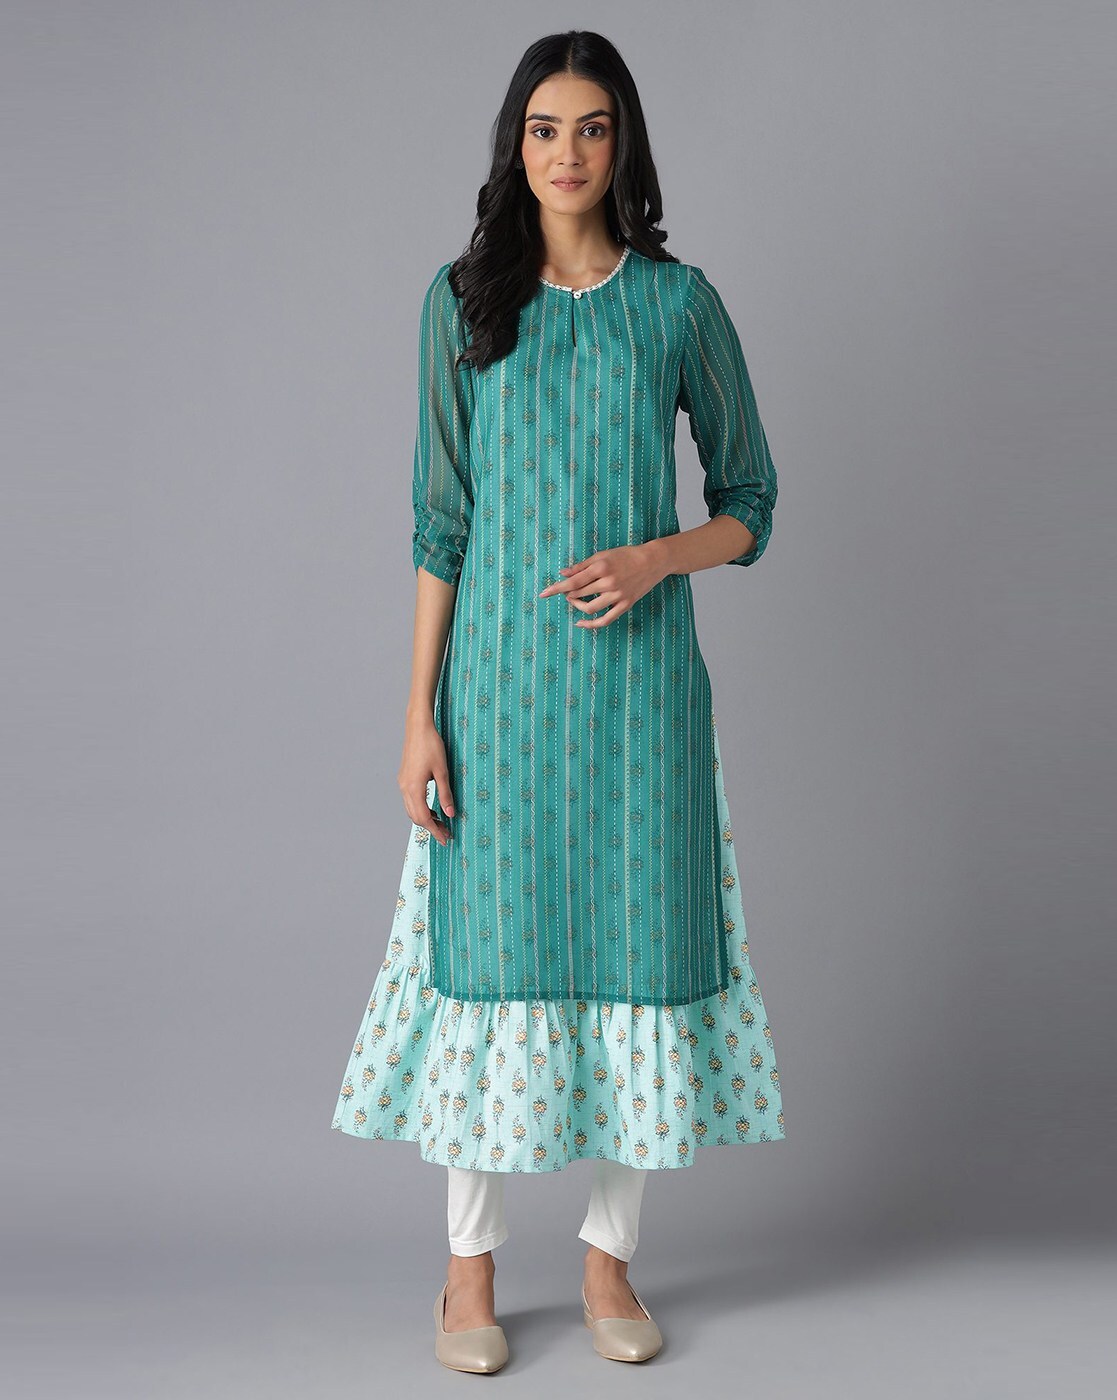 Pleasant Green Colored Partywear Printed Cotton Kurti With Koti